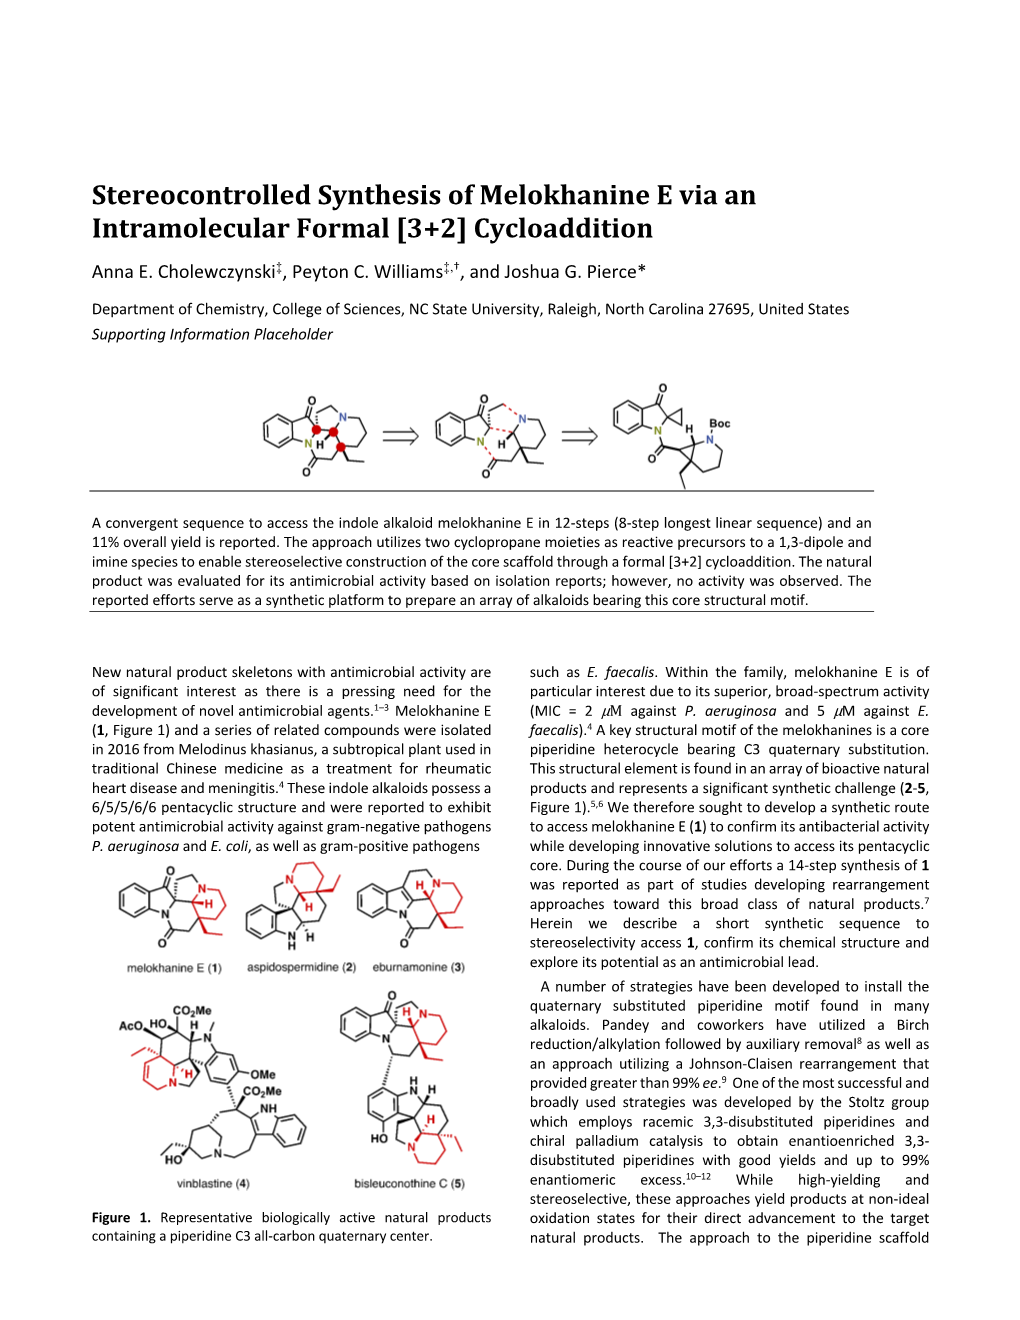 Stereocontrolled Synthesis of Melokhanine E Via an Intramolecular Formal [3+2] Cycloaddition Anna E